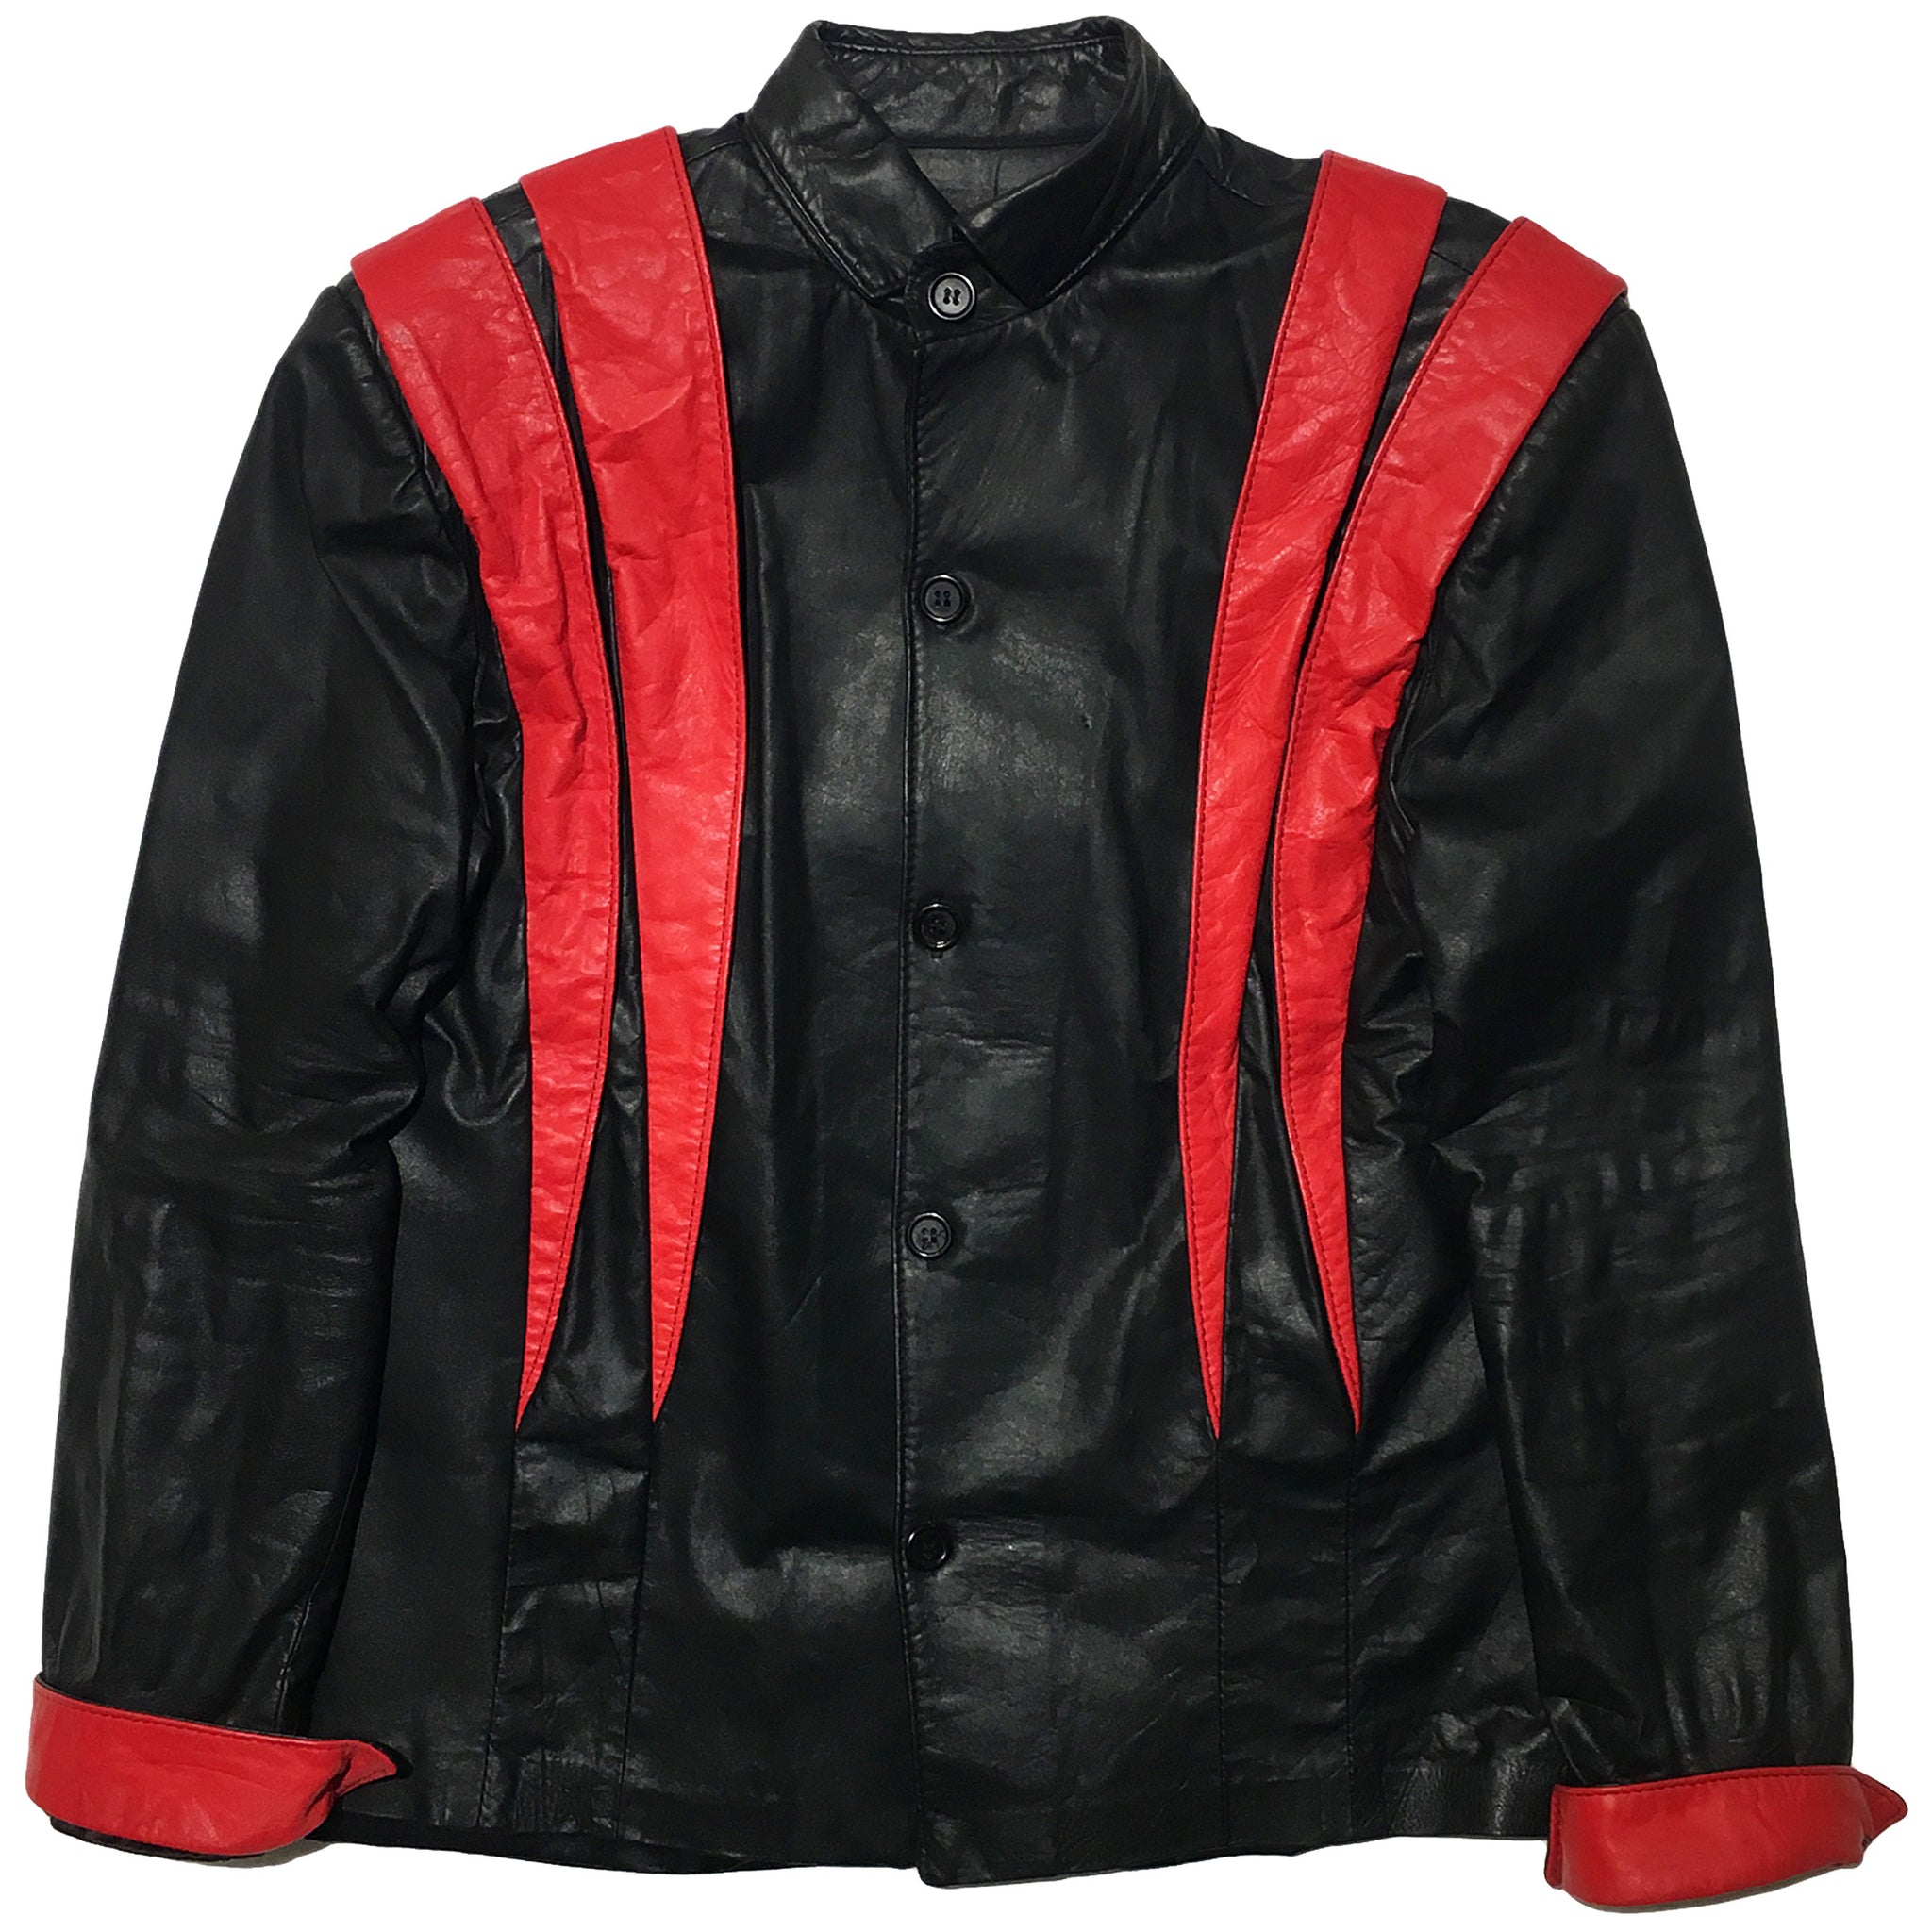 The Leather Ranch Thriller Style Jacket